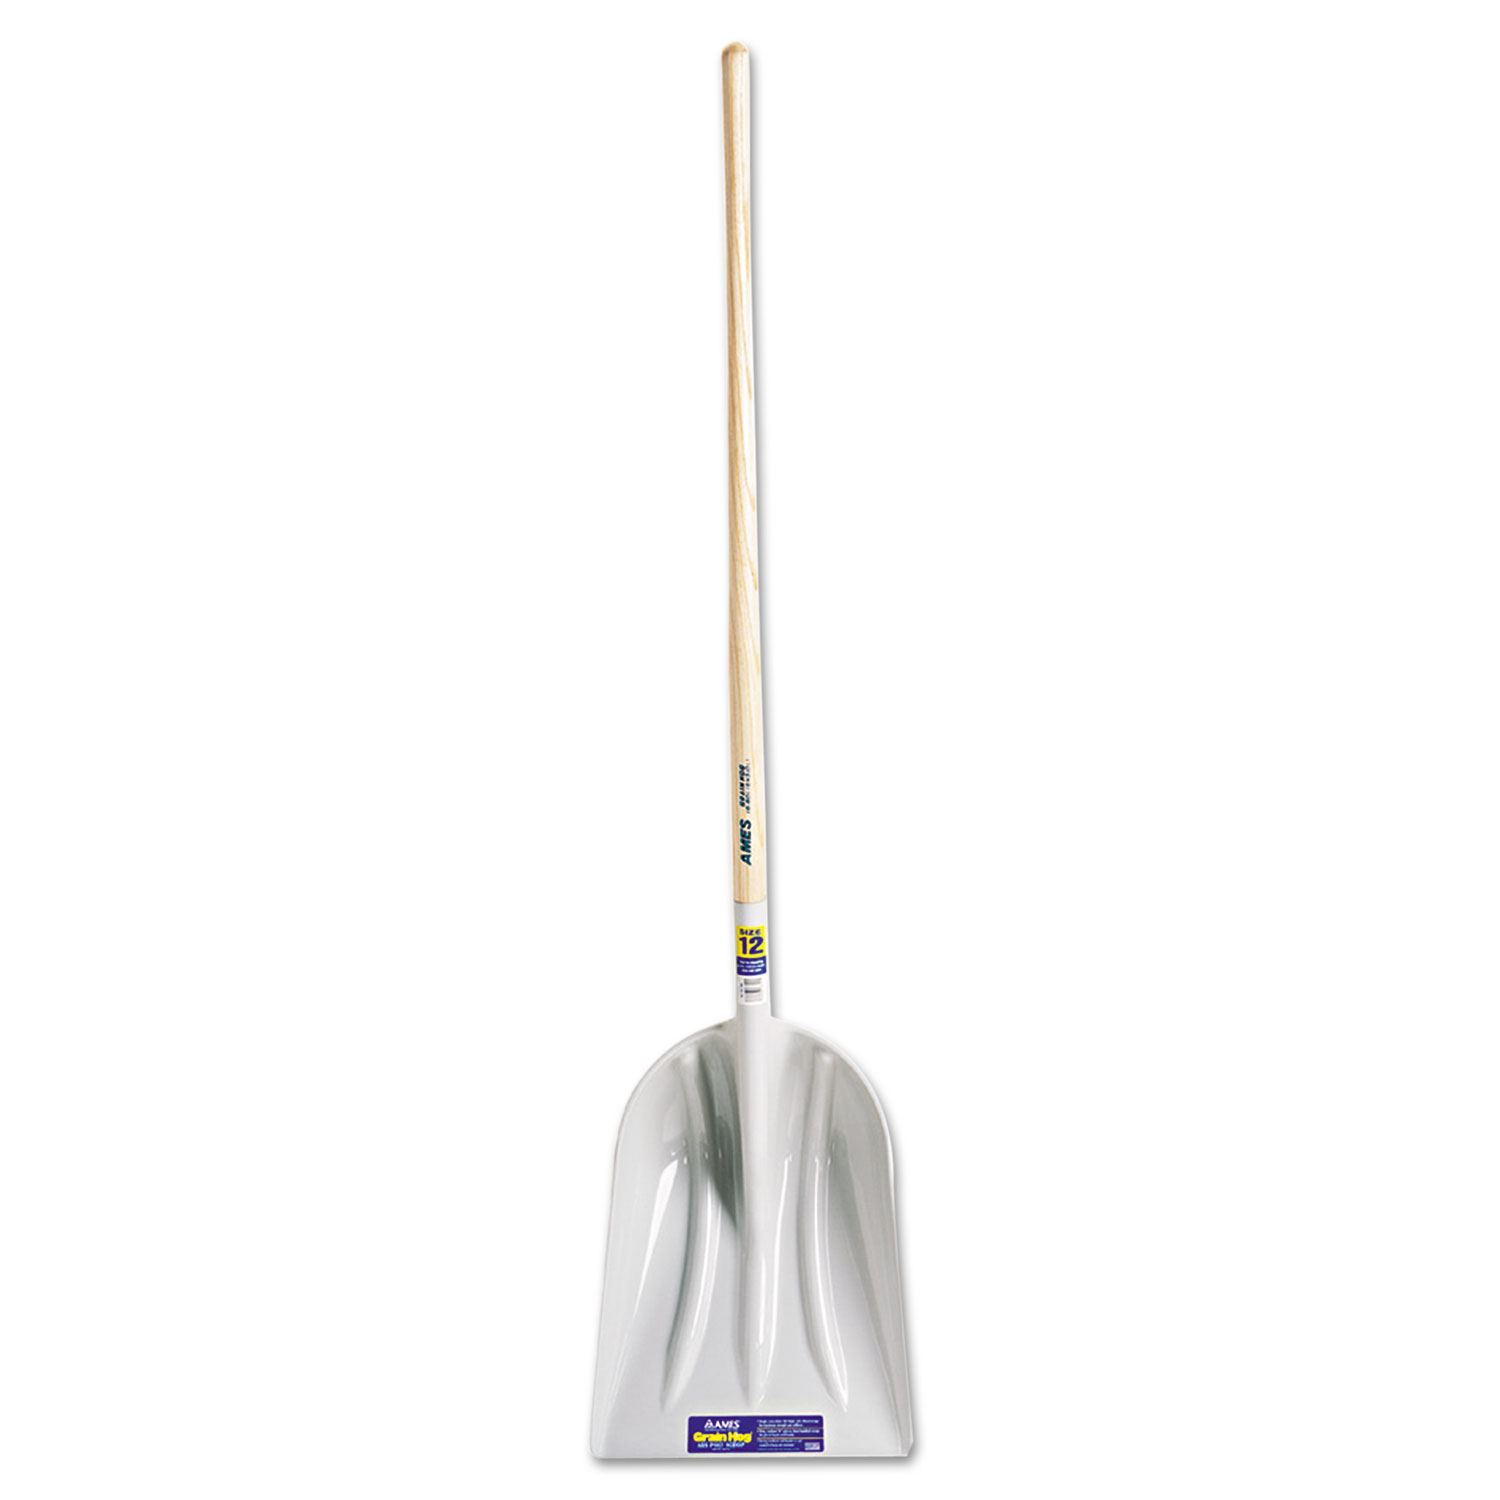 Poly Scoop, Size 12, Ash Handle With D-Grip